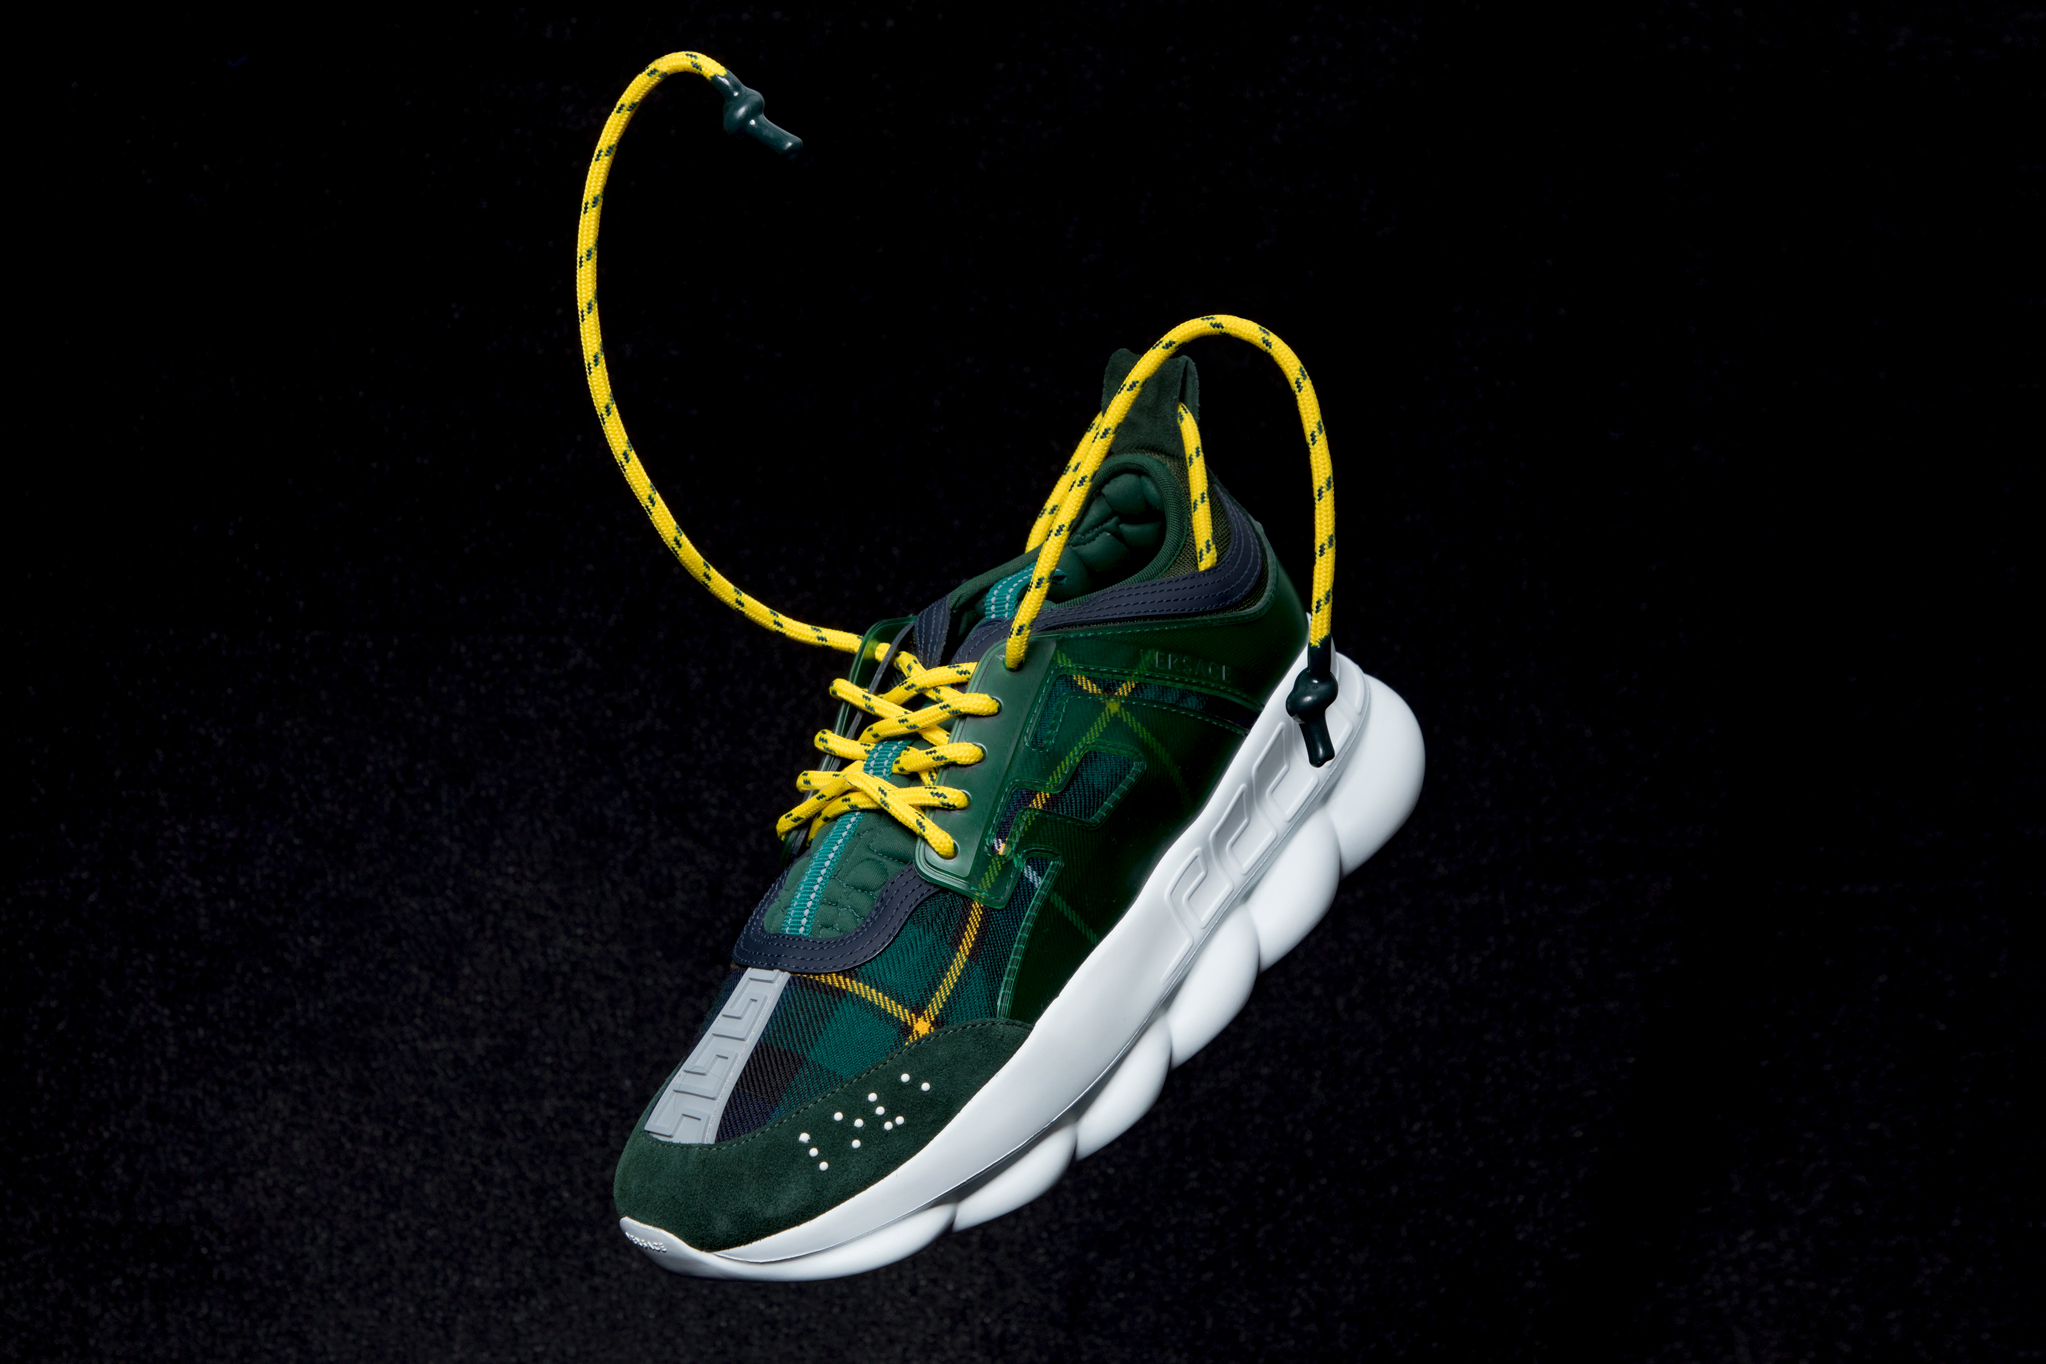 The Future of Versace's Chain Reaction - Sneaker Freaker